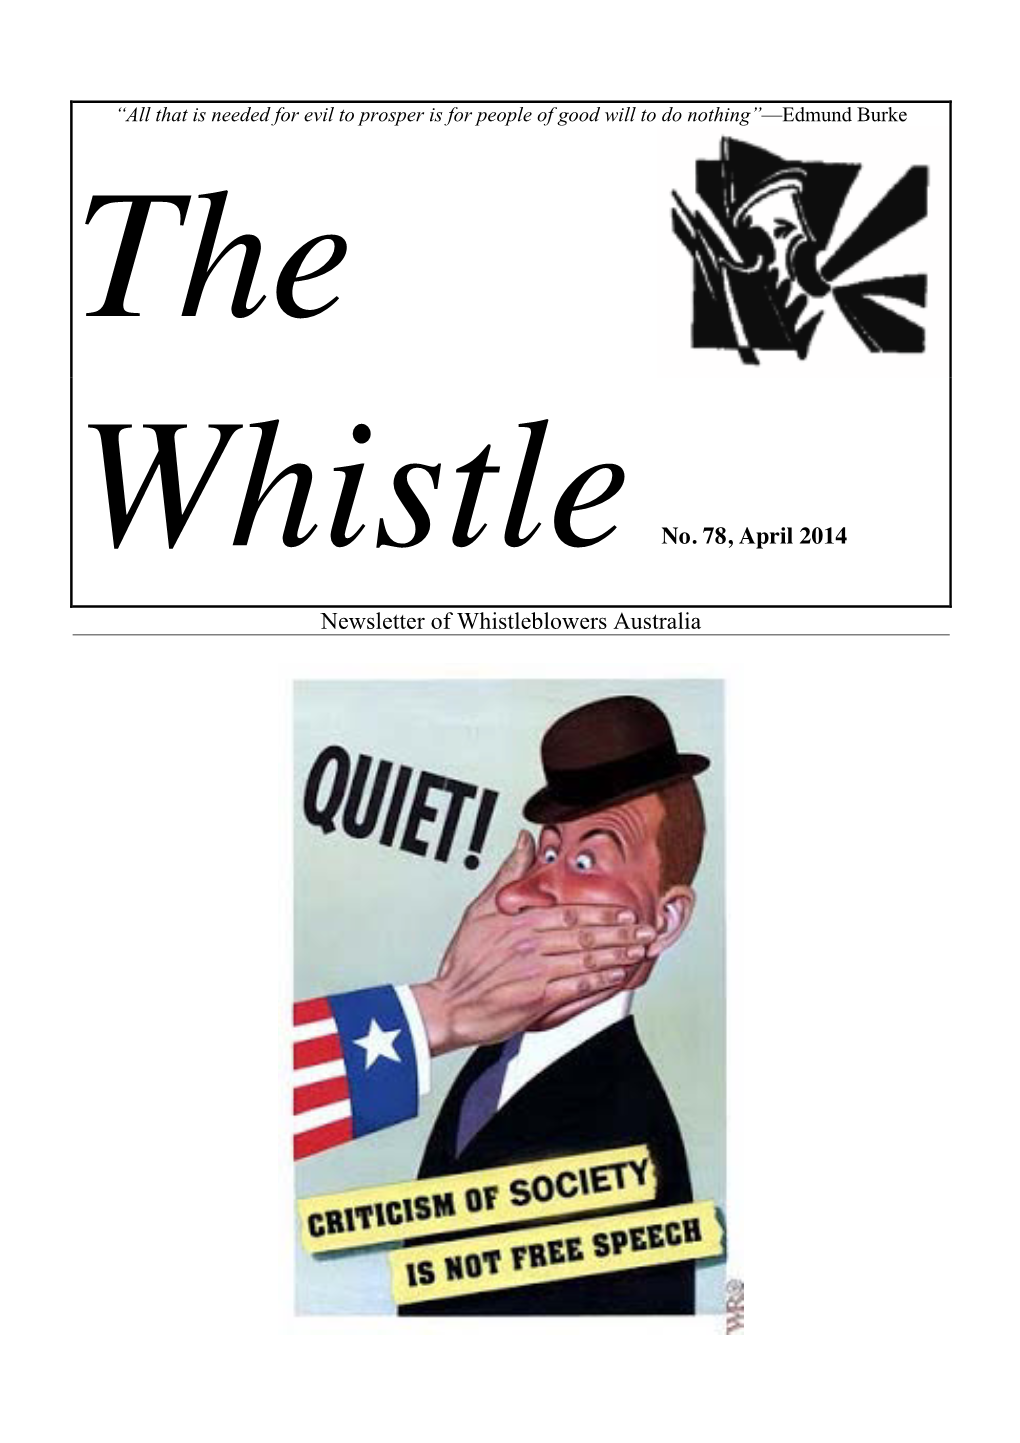 The Whistle, April 2014